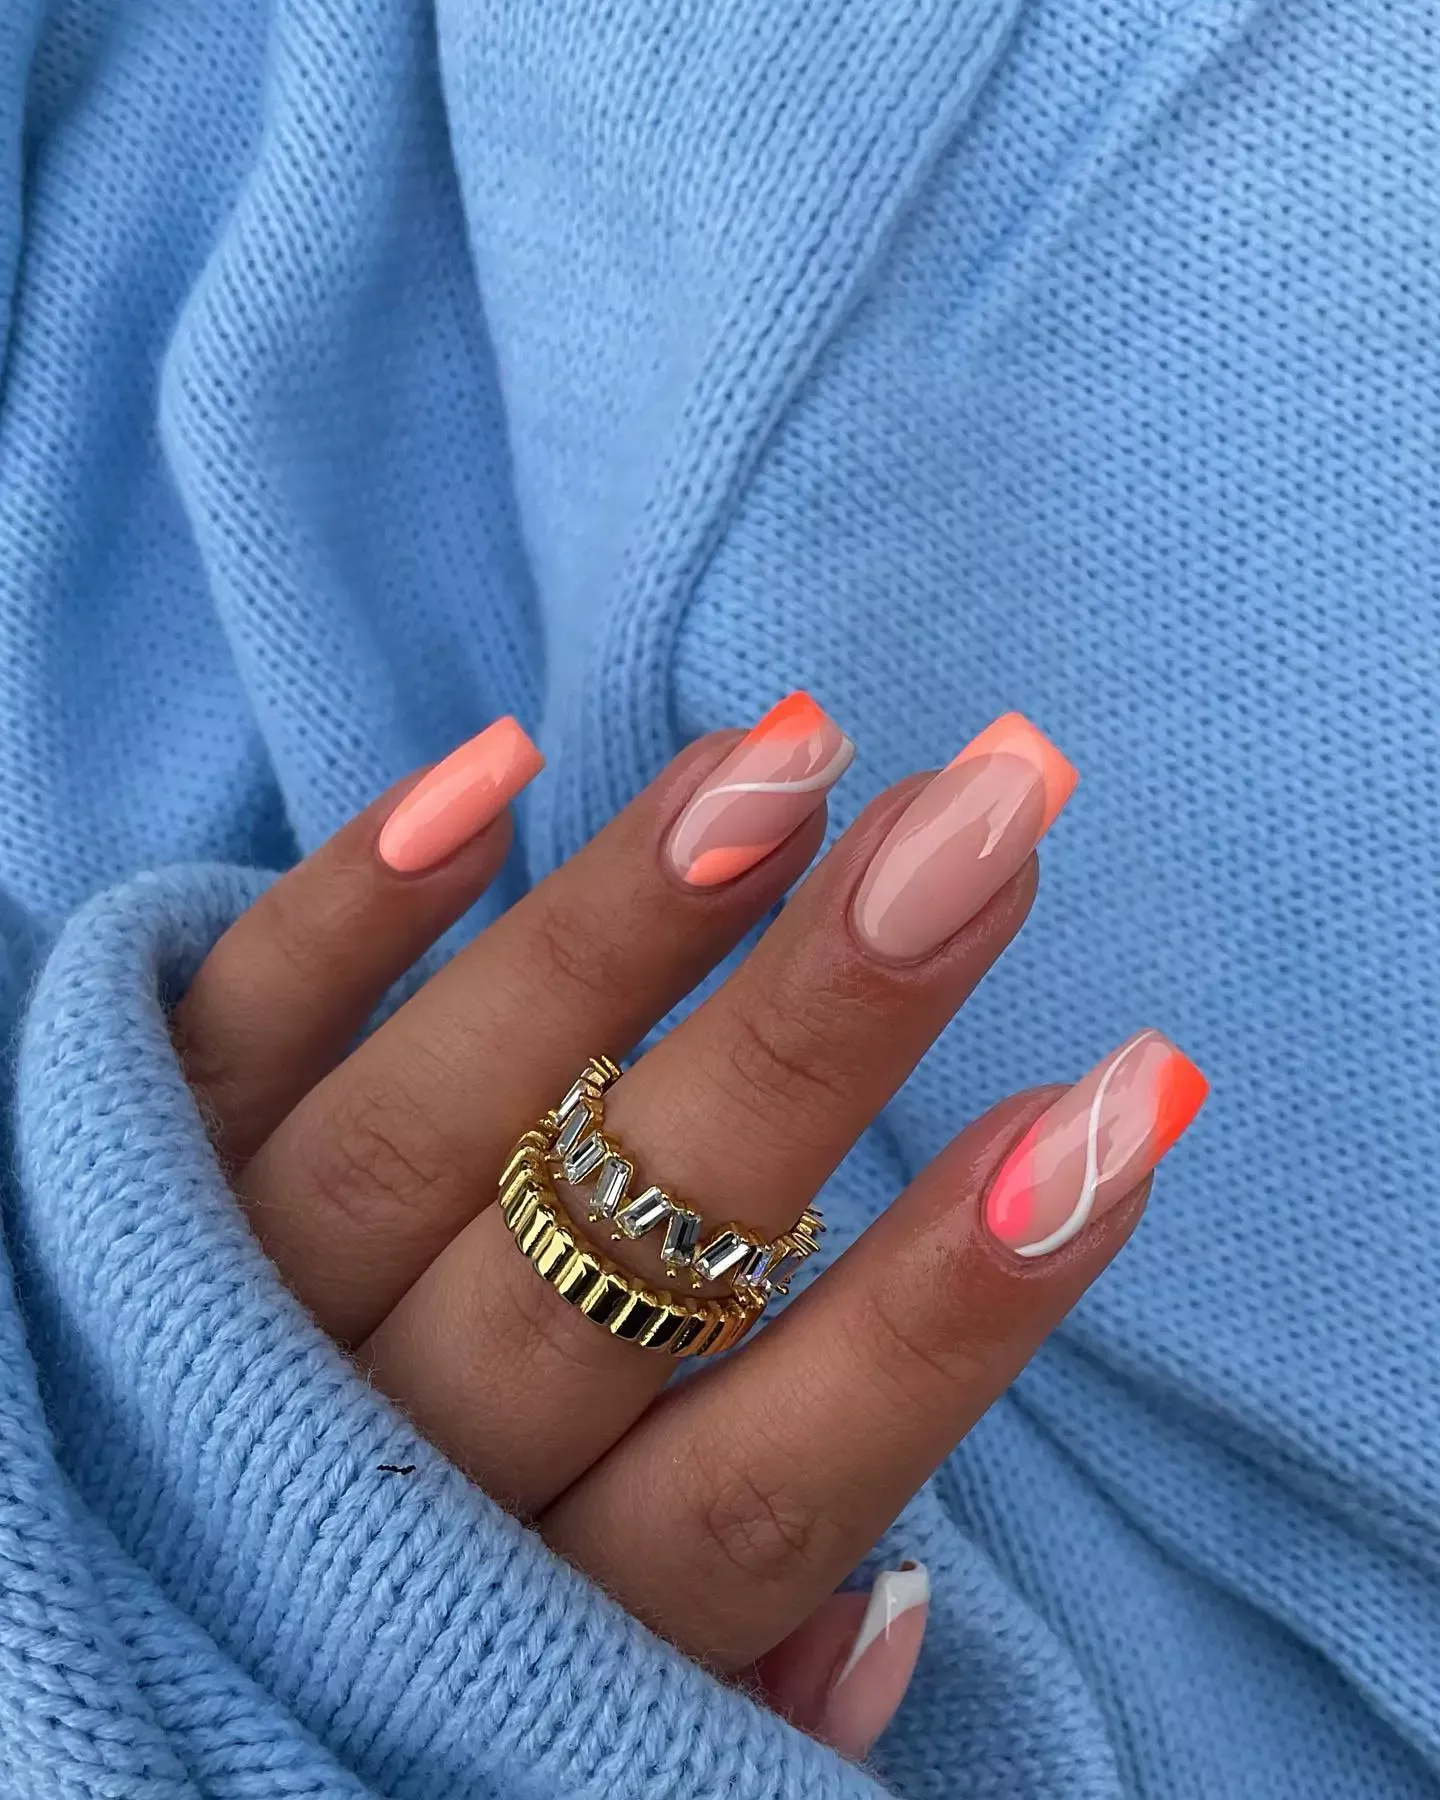 39 Cute Summer Nail Ideas You Have To Try This Year